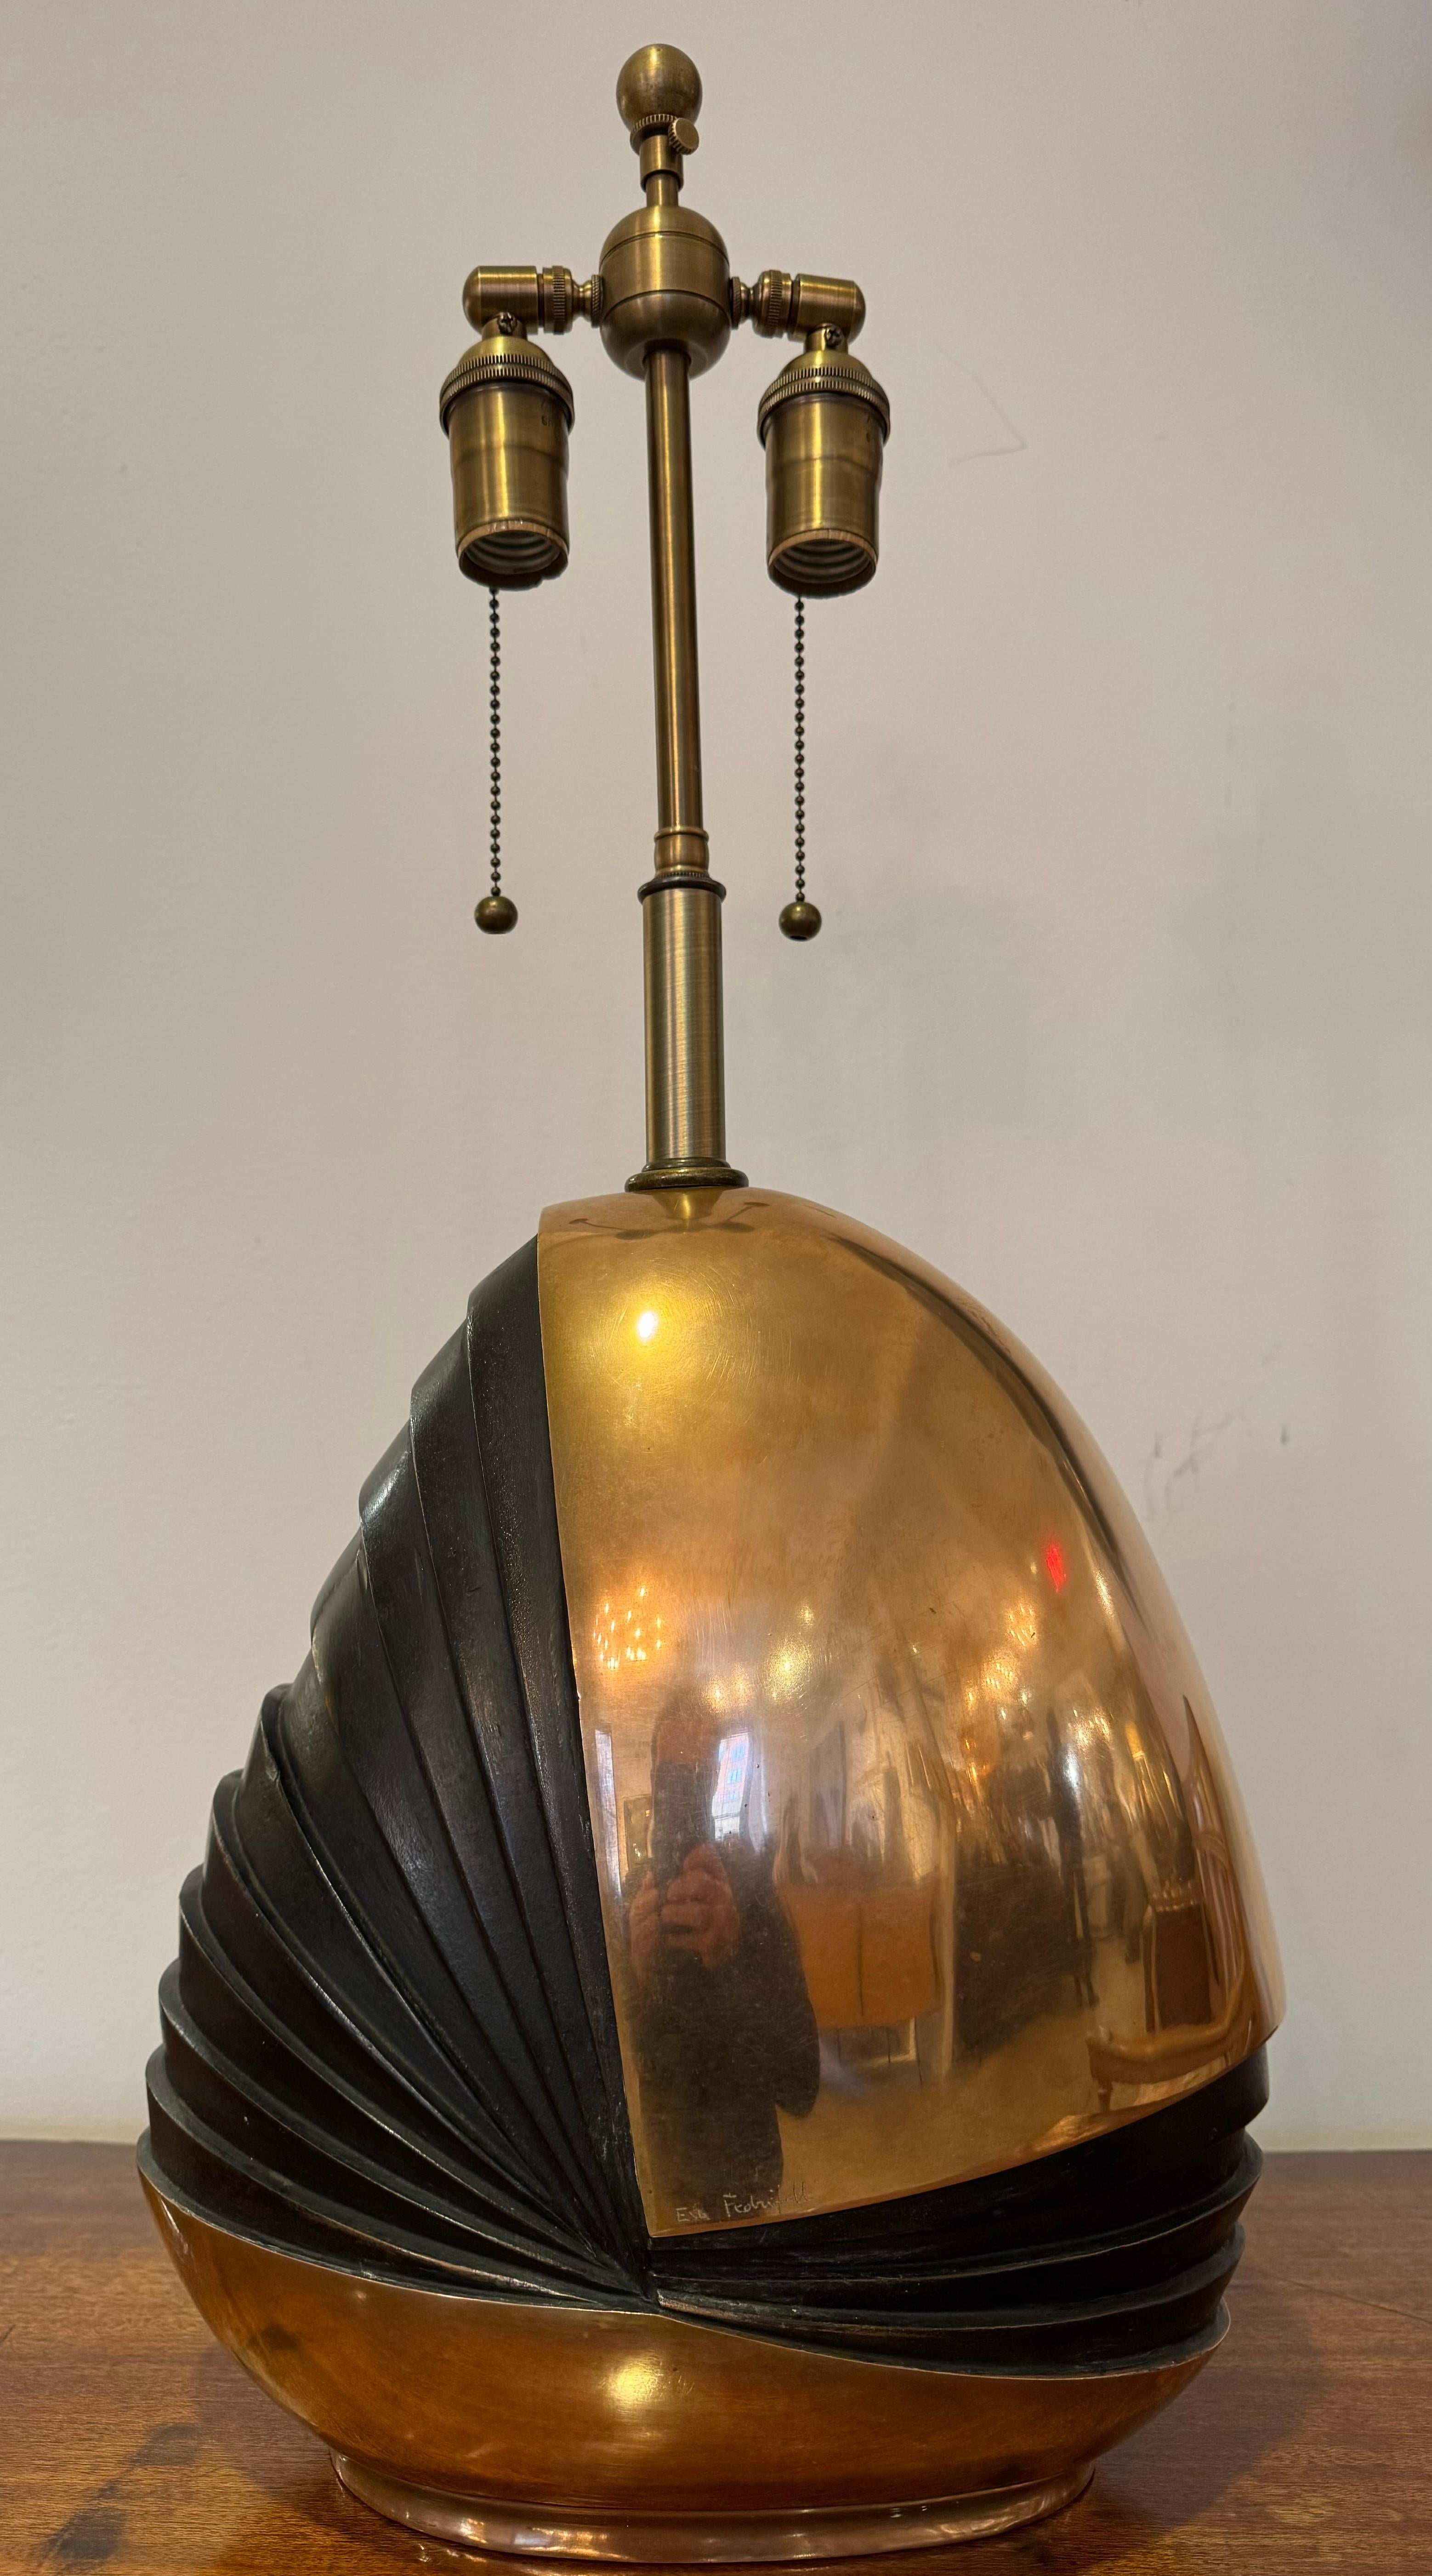 A wonderful 1970s sculptural bronze table lamp by faved Italian artist, Esa Fedrigolli. Signed. Rewired with an aged brass double socket cluster.